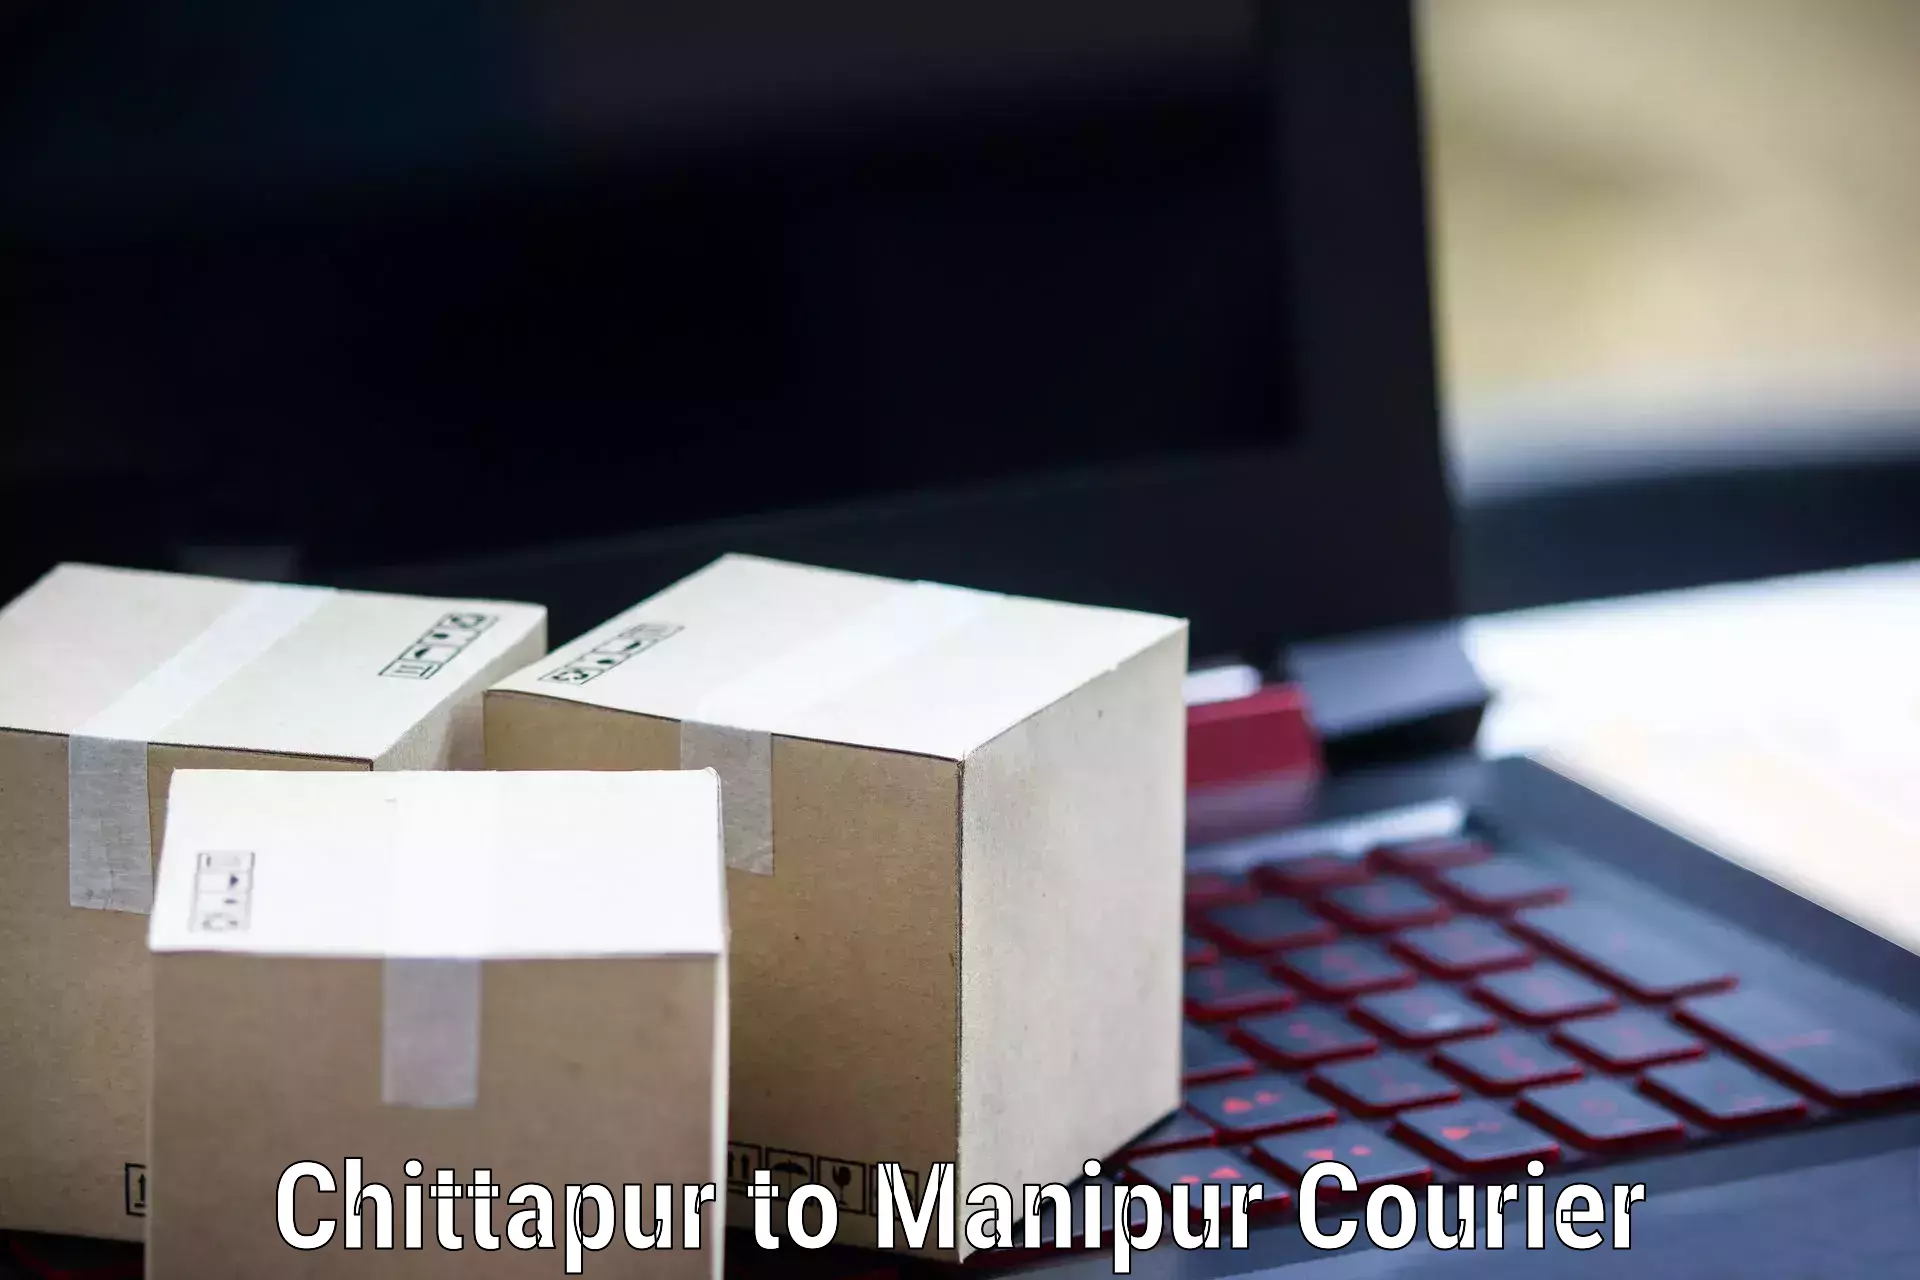 Flexible delivery schedules Chittapur to Chandel